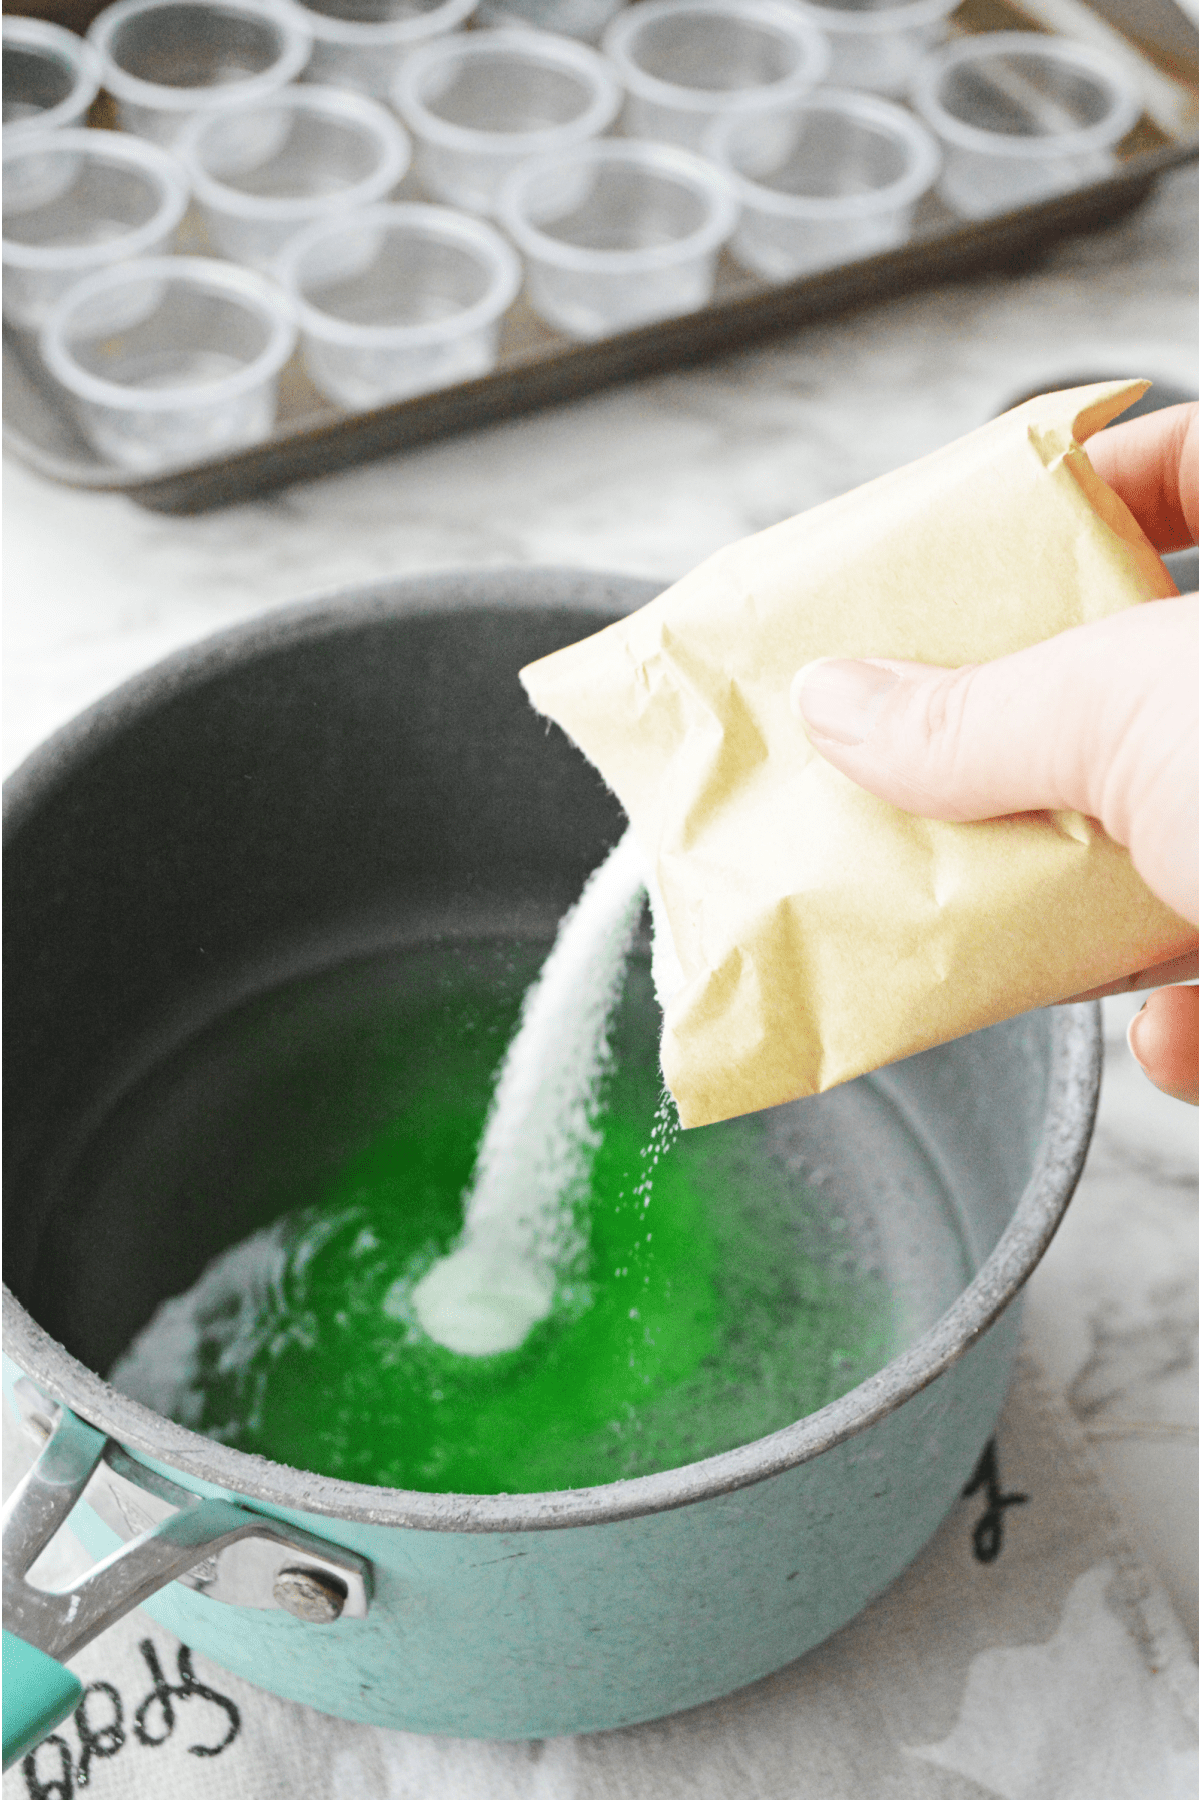 Adding lime jello to boiling water